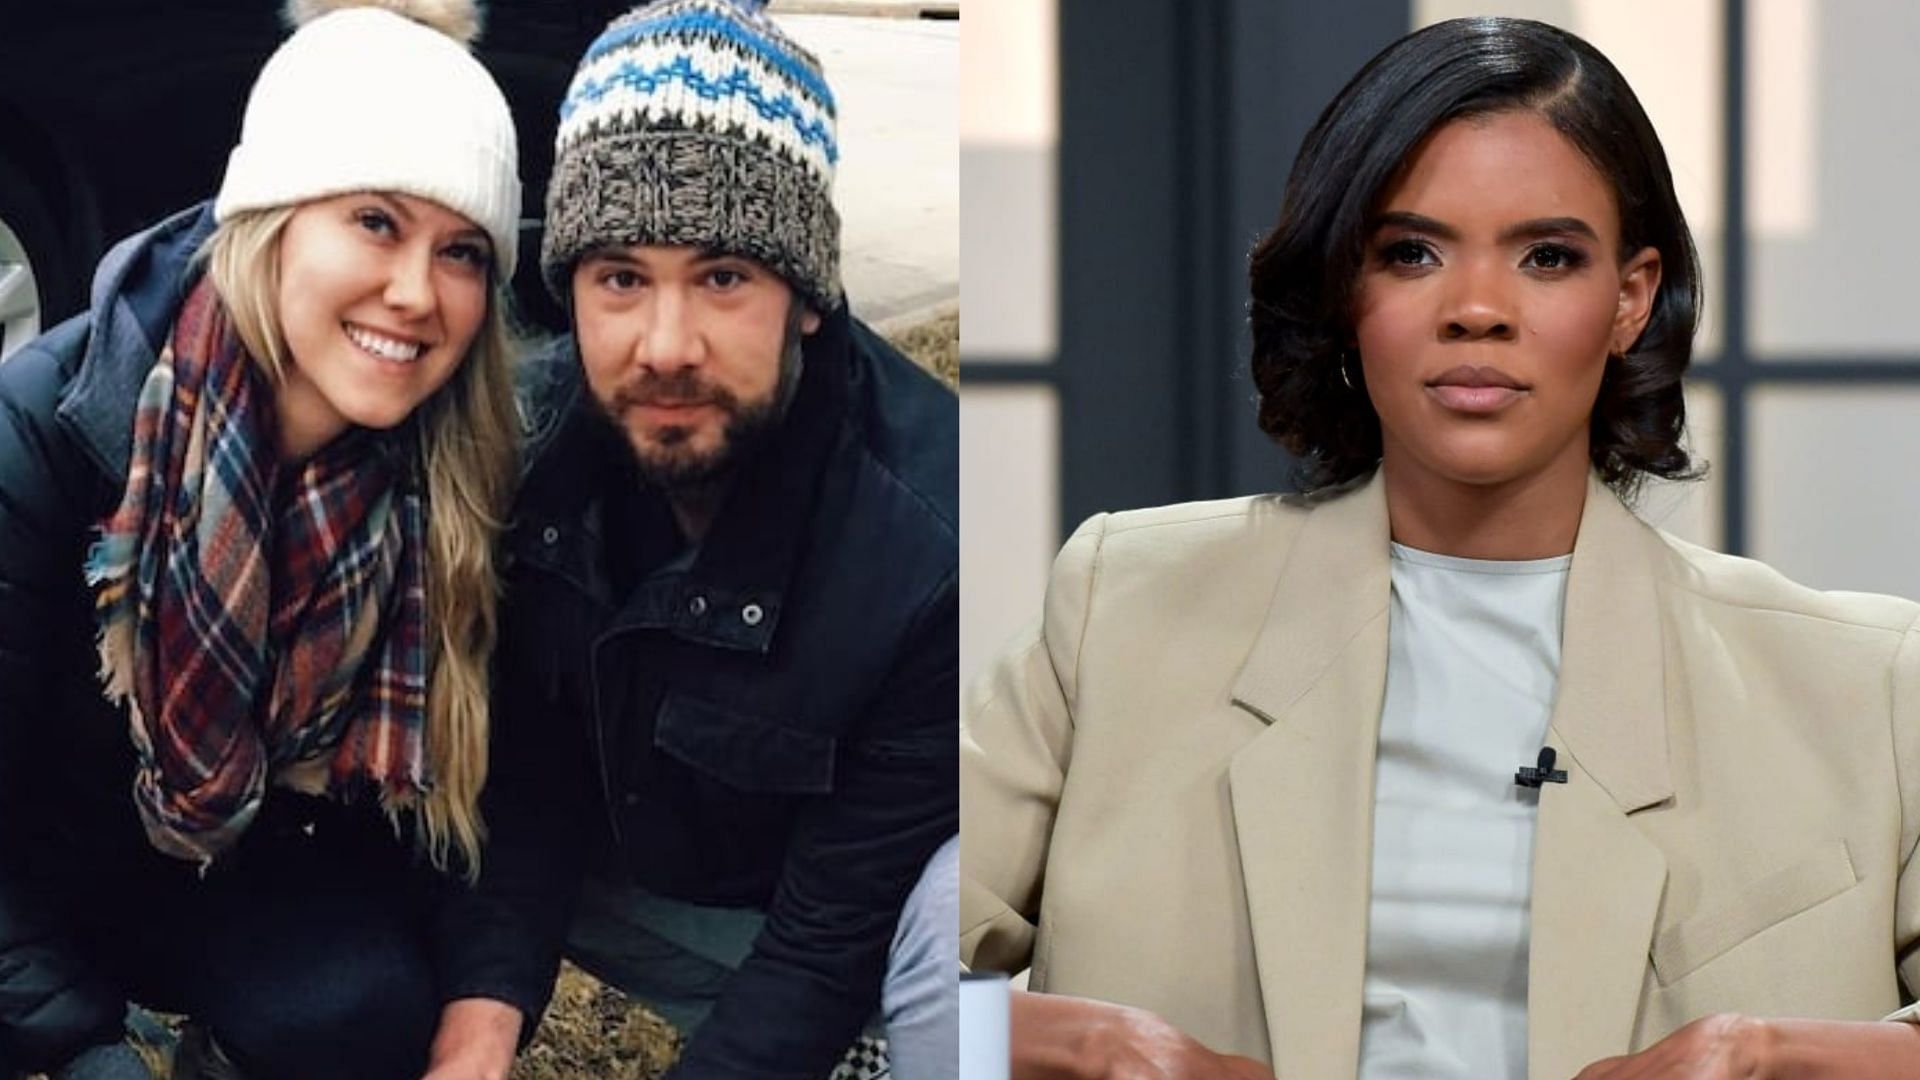 Hilary and Steven Crowder, Candace Owens. (Photo via @louderwithcrowder/Instagram, Jason Davis/Getty Images)